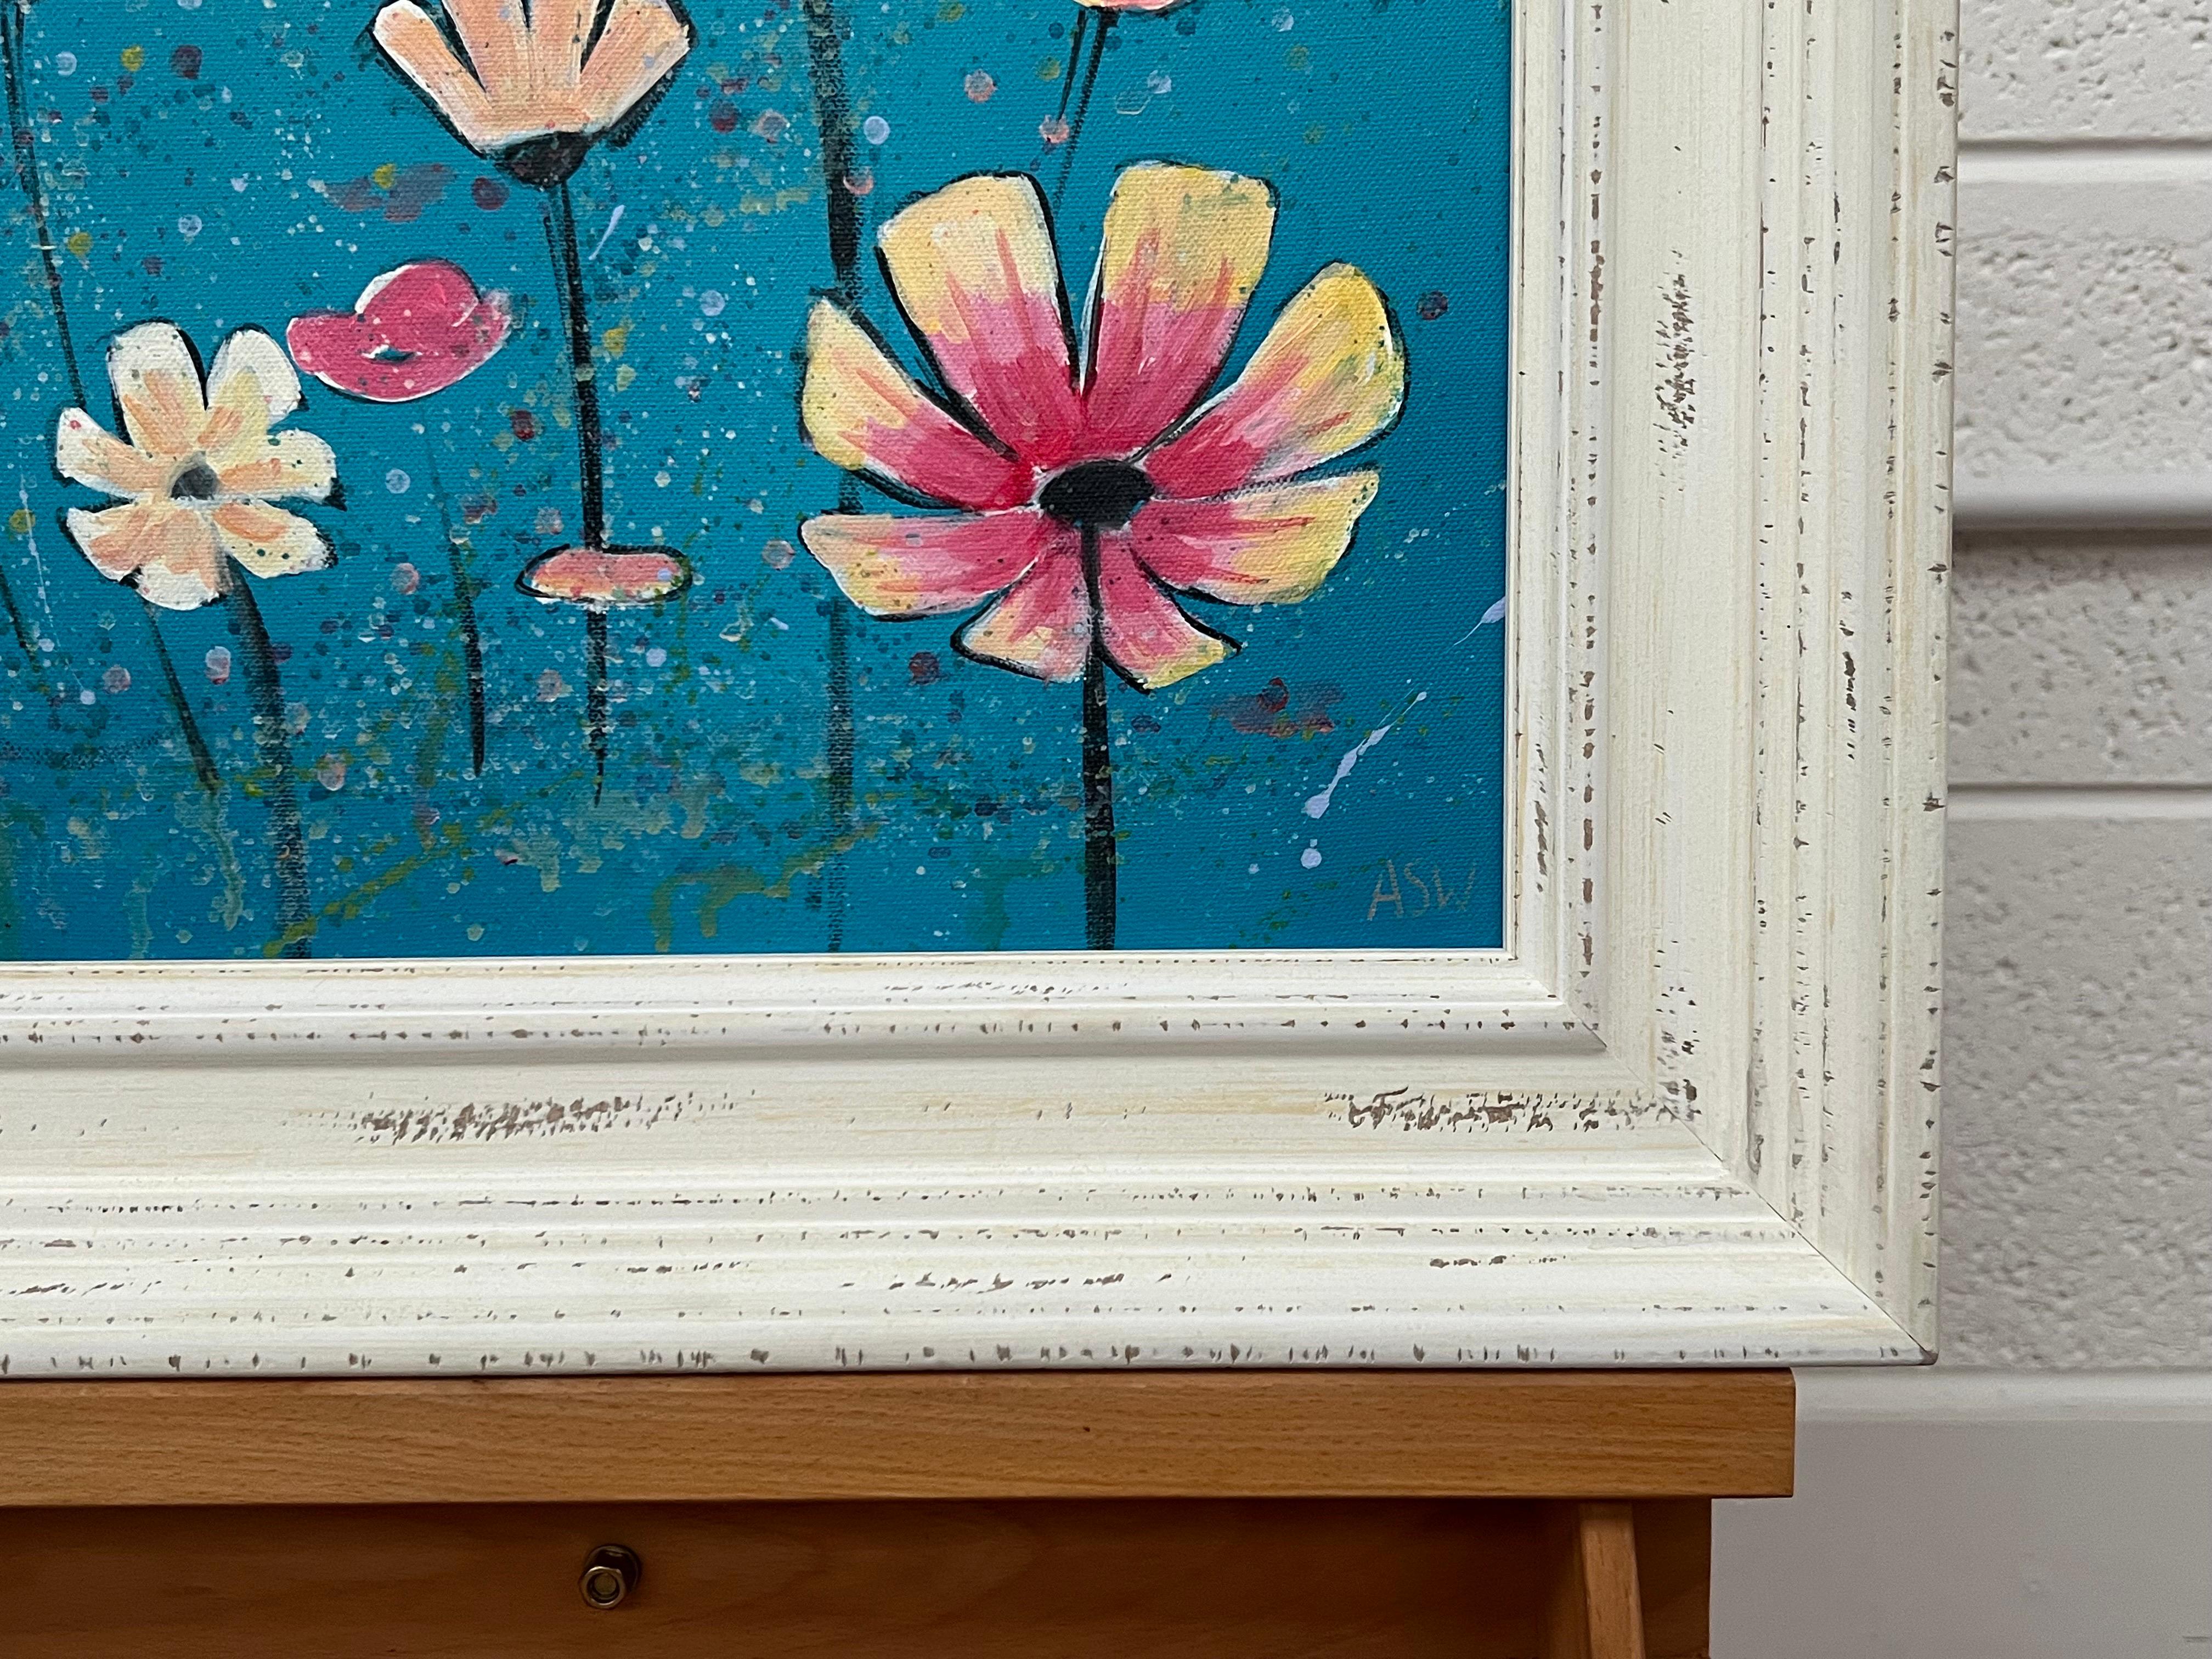 Design Study of Wild Pink & White Flowers on Turquoise by Contemporary Artist For Sale 1